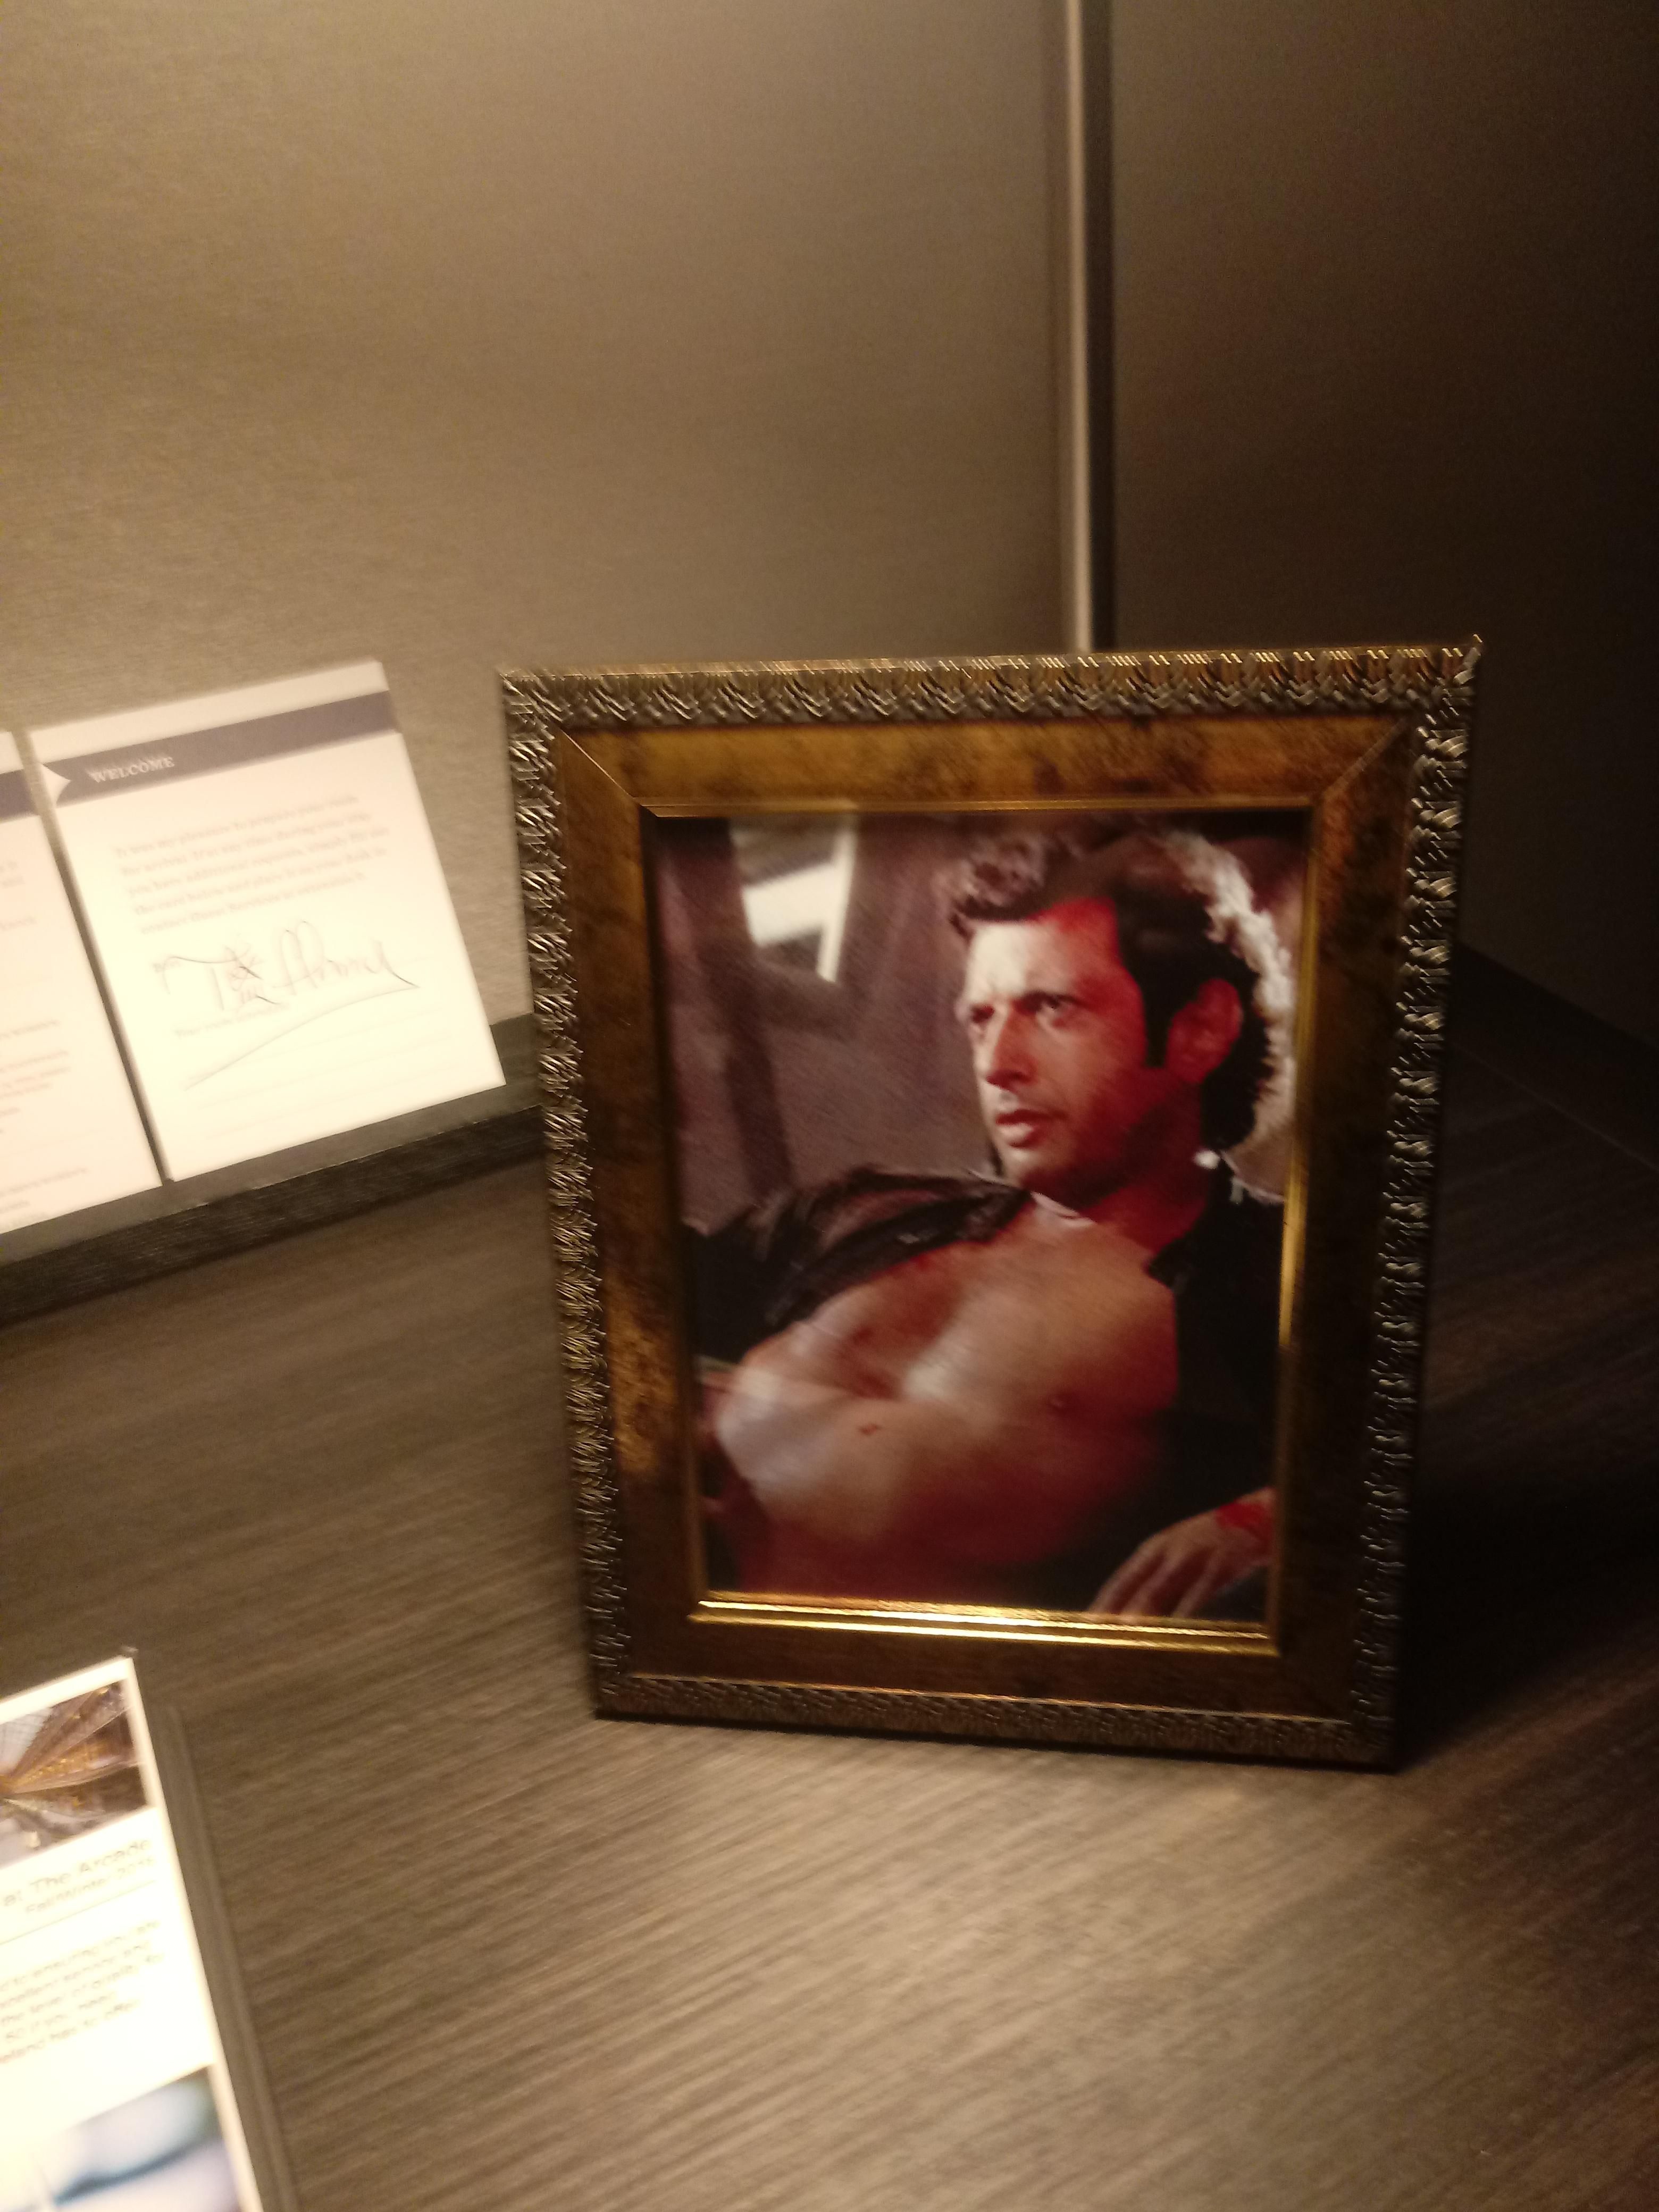 I'm at the Hyatt hotel in downtown Cleveland. Under "special requests", I asked for a sexy picture of Jeff Goldblum for my wife. They did not disappoint.